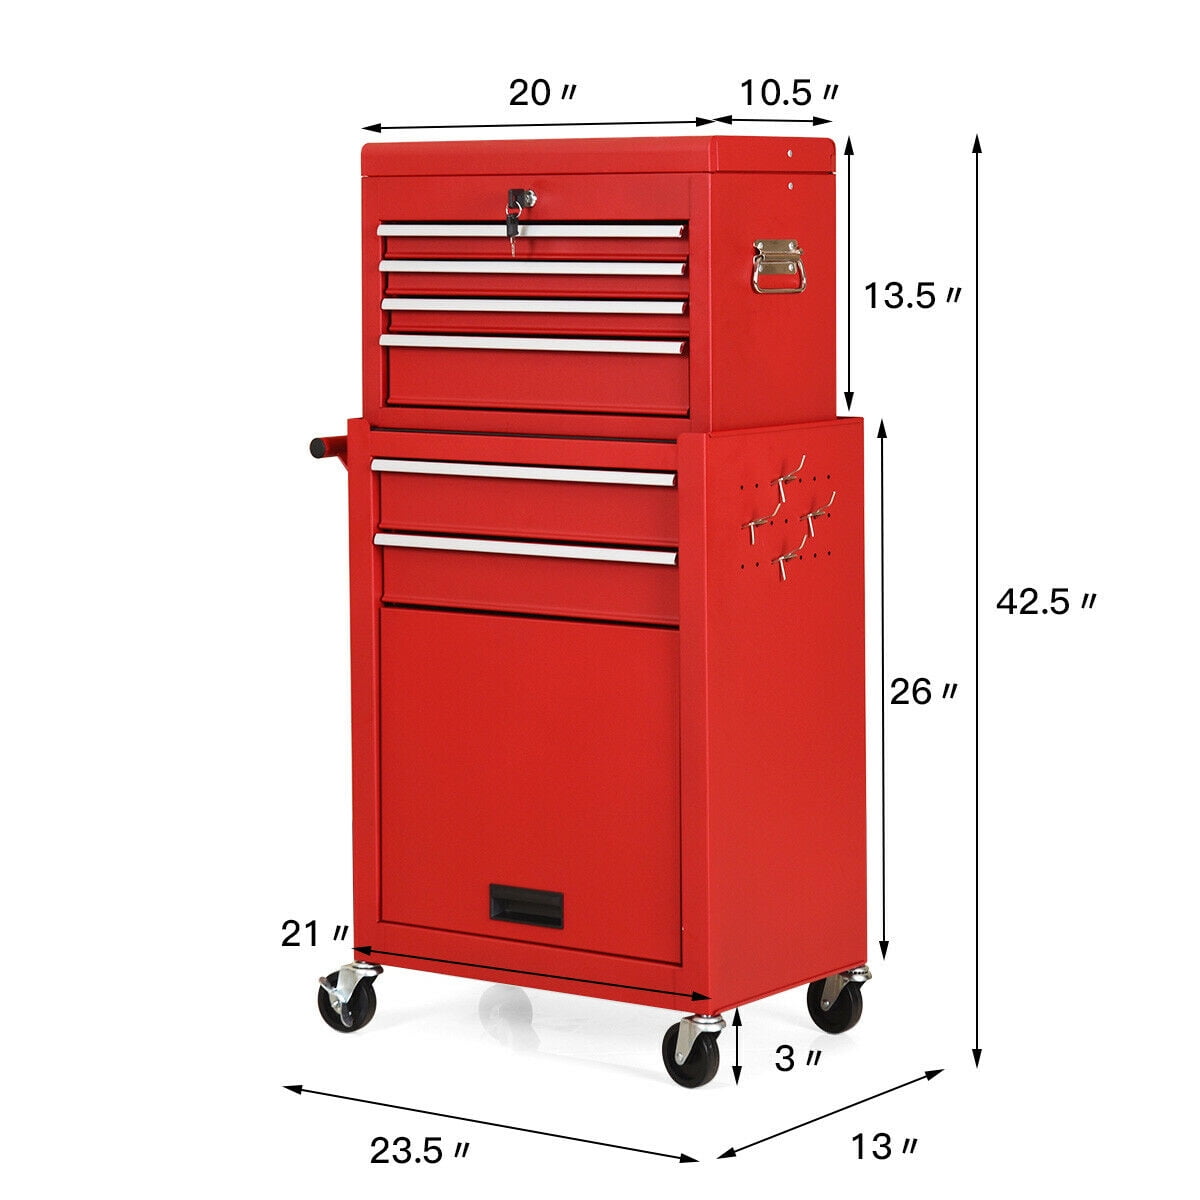 Details about   Pro 5 Drawers Toolbox Chest Cabinet Trolley Boxes Garage Storage Toolbox Red 